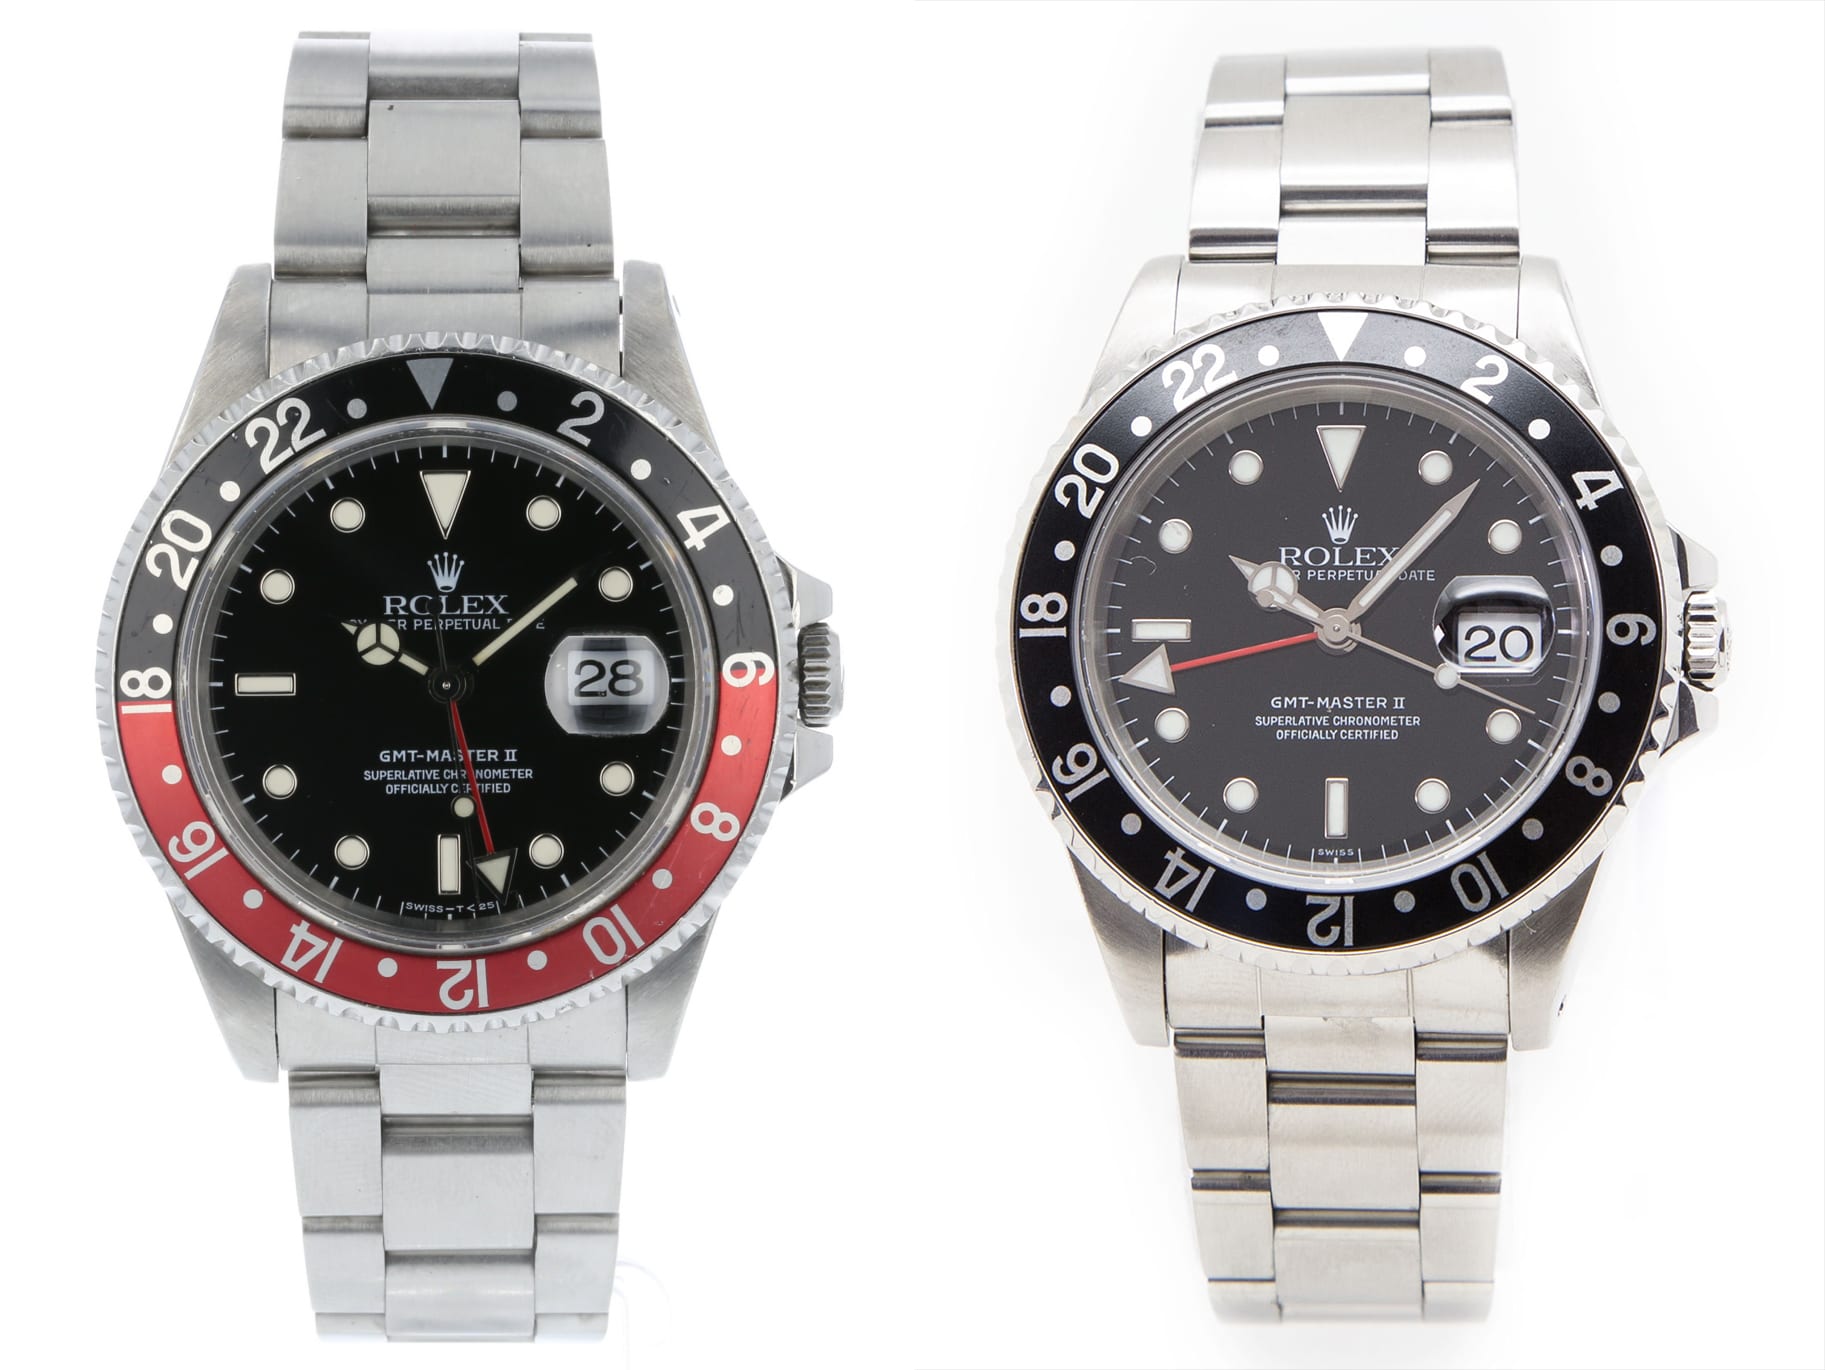 Two versions of the Rolex GMT Master II ref 16710.